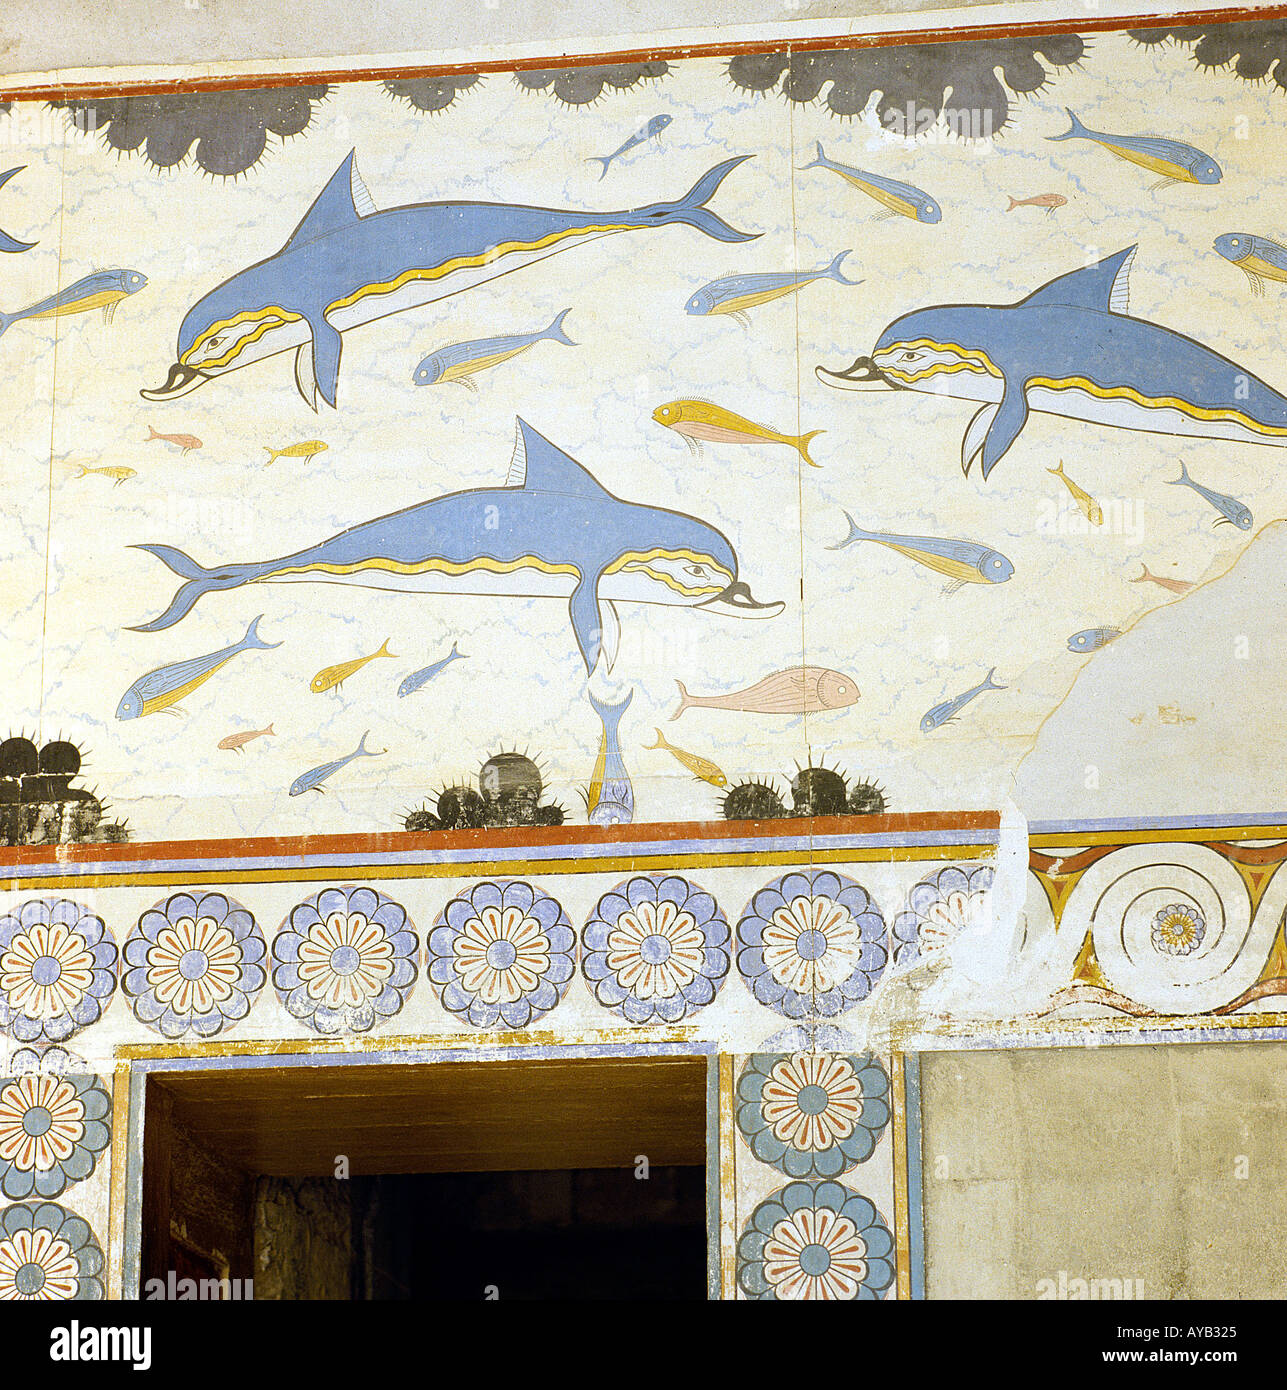 Inside the Palace of Knossos Stock Photo